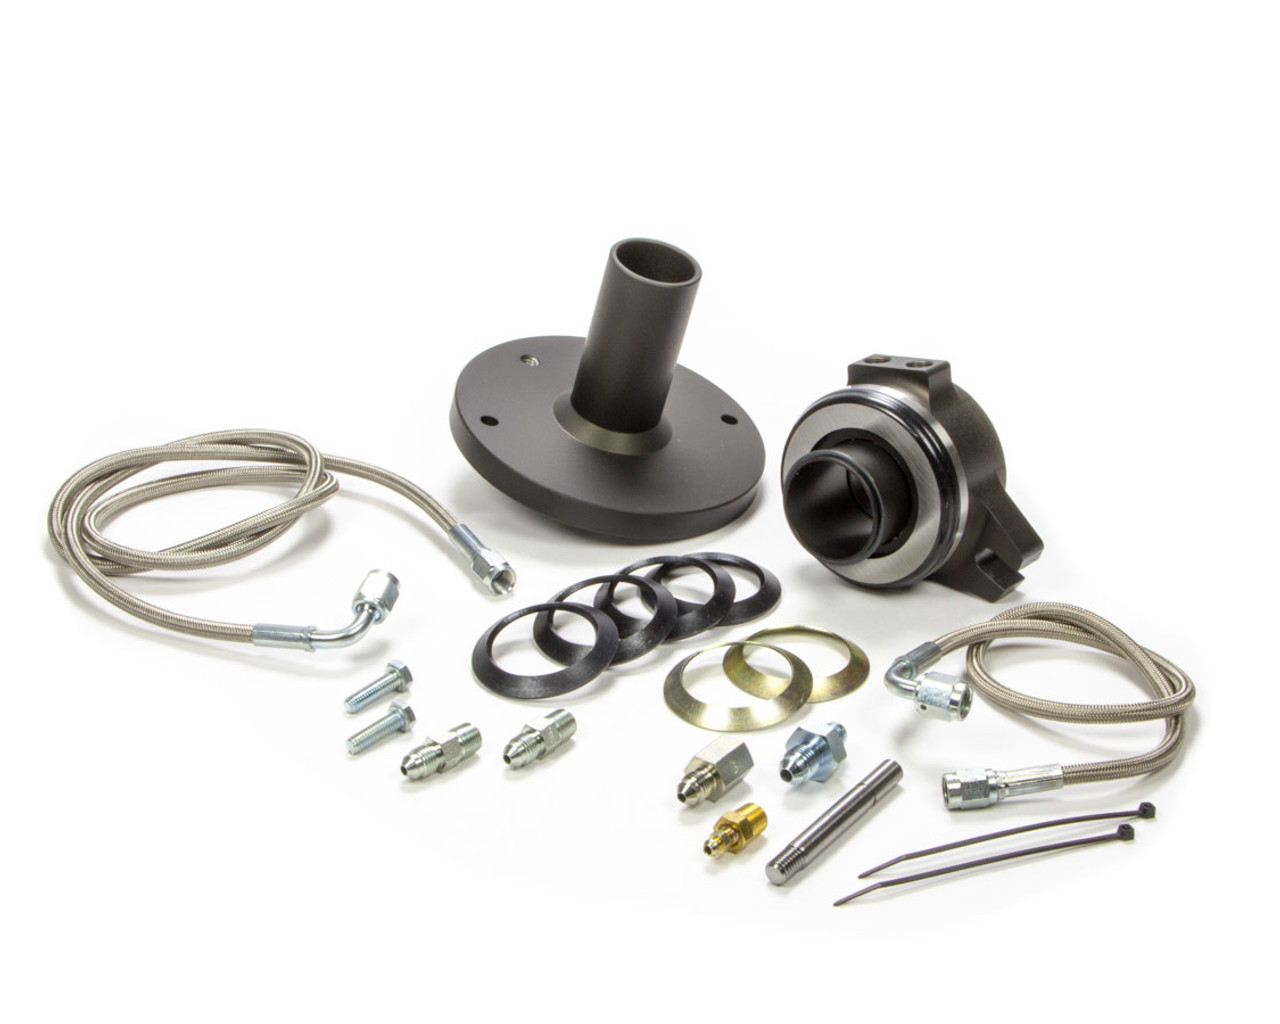 Hydraulic Release Bearng Kit T56 Universal